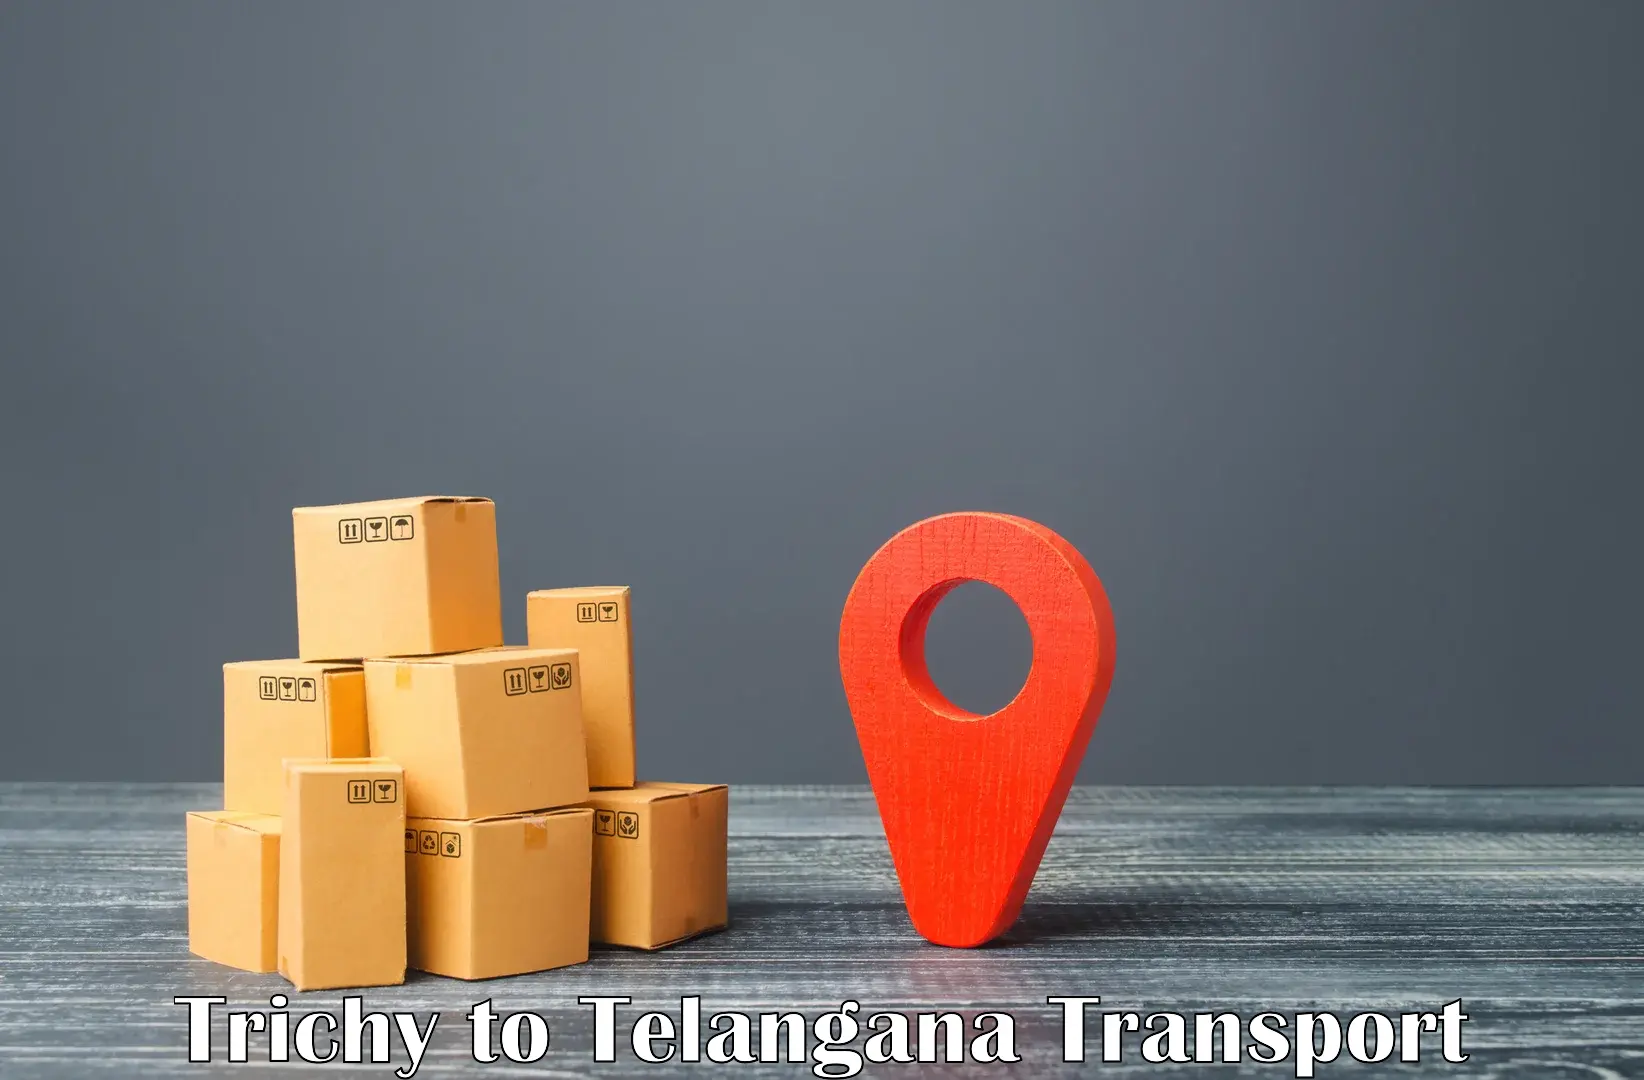 Nearby transport service Trichy to Shamshabad